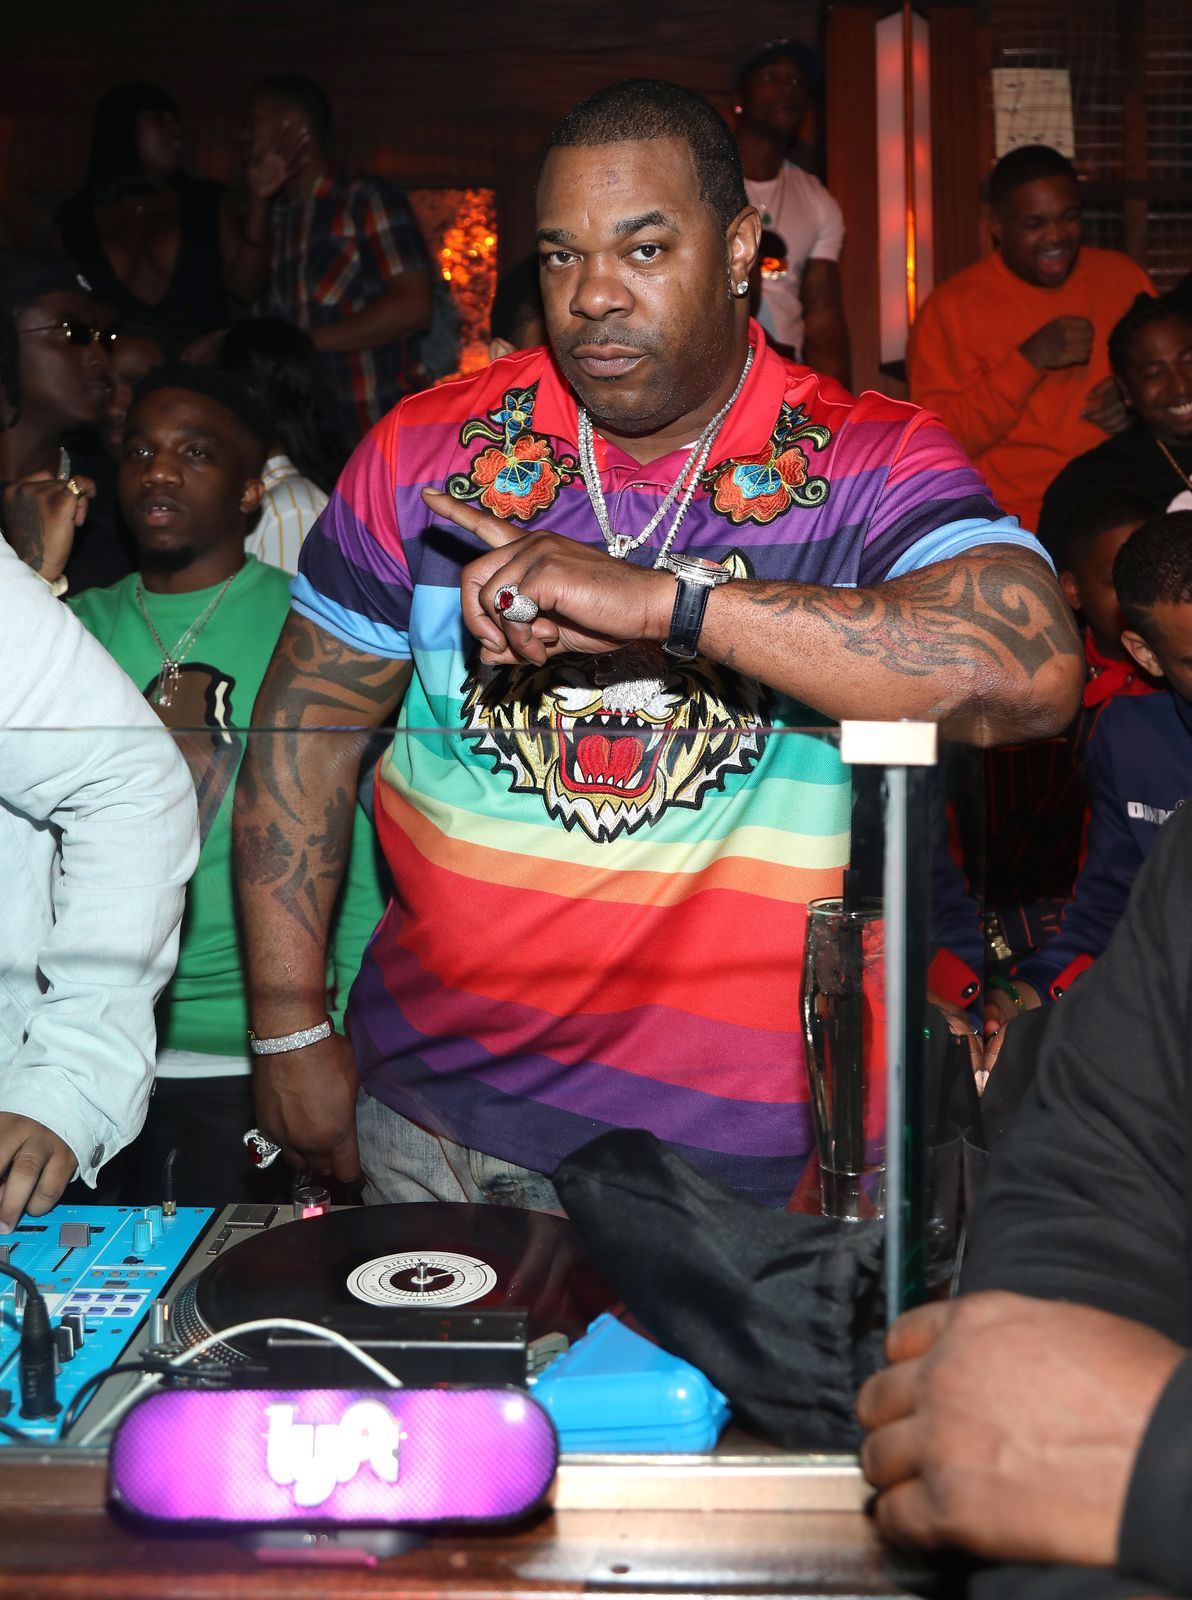 Busta Rhymes attends IGA X BET Awards Party 2018 on June 23, 2018 in Los Angeles, California. | Photo: Getty Images